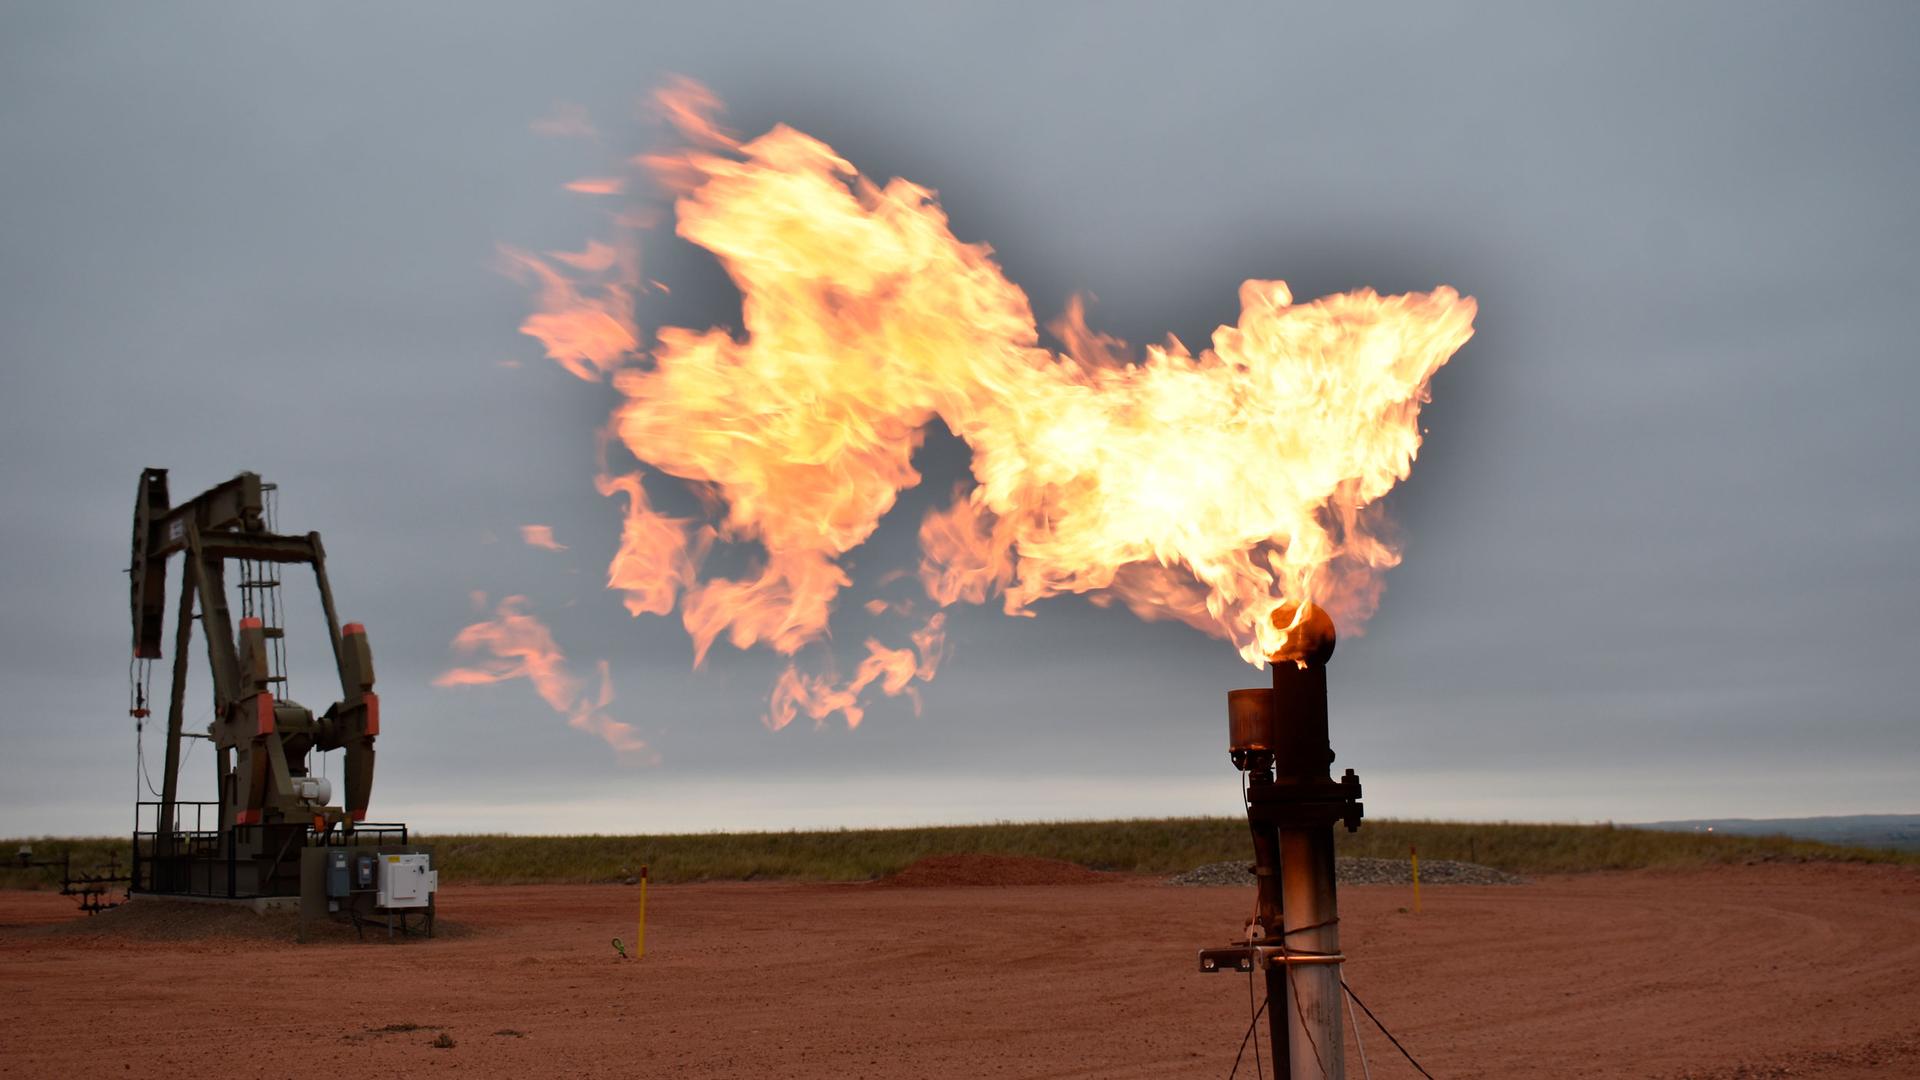 A flare burns natural gas at an oil well on Aug. 26, 2021, in Watford City, North Dakota.